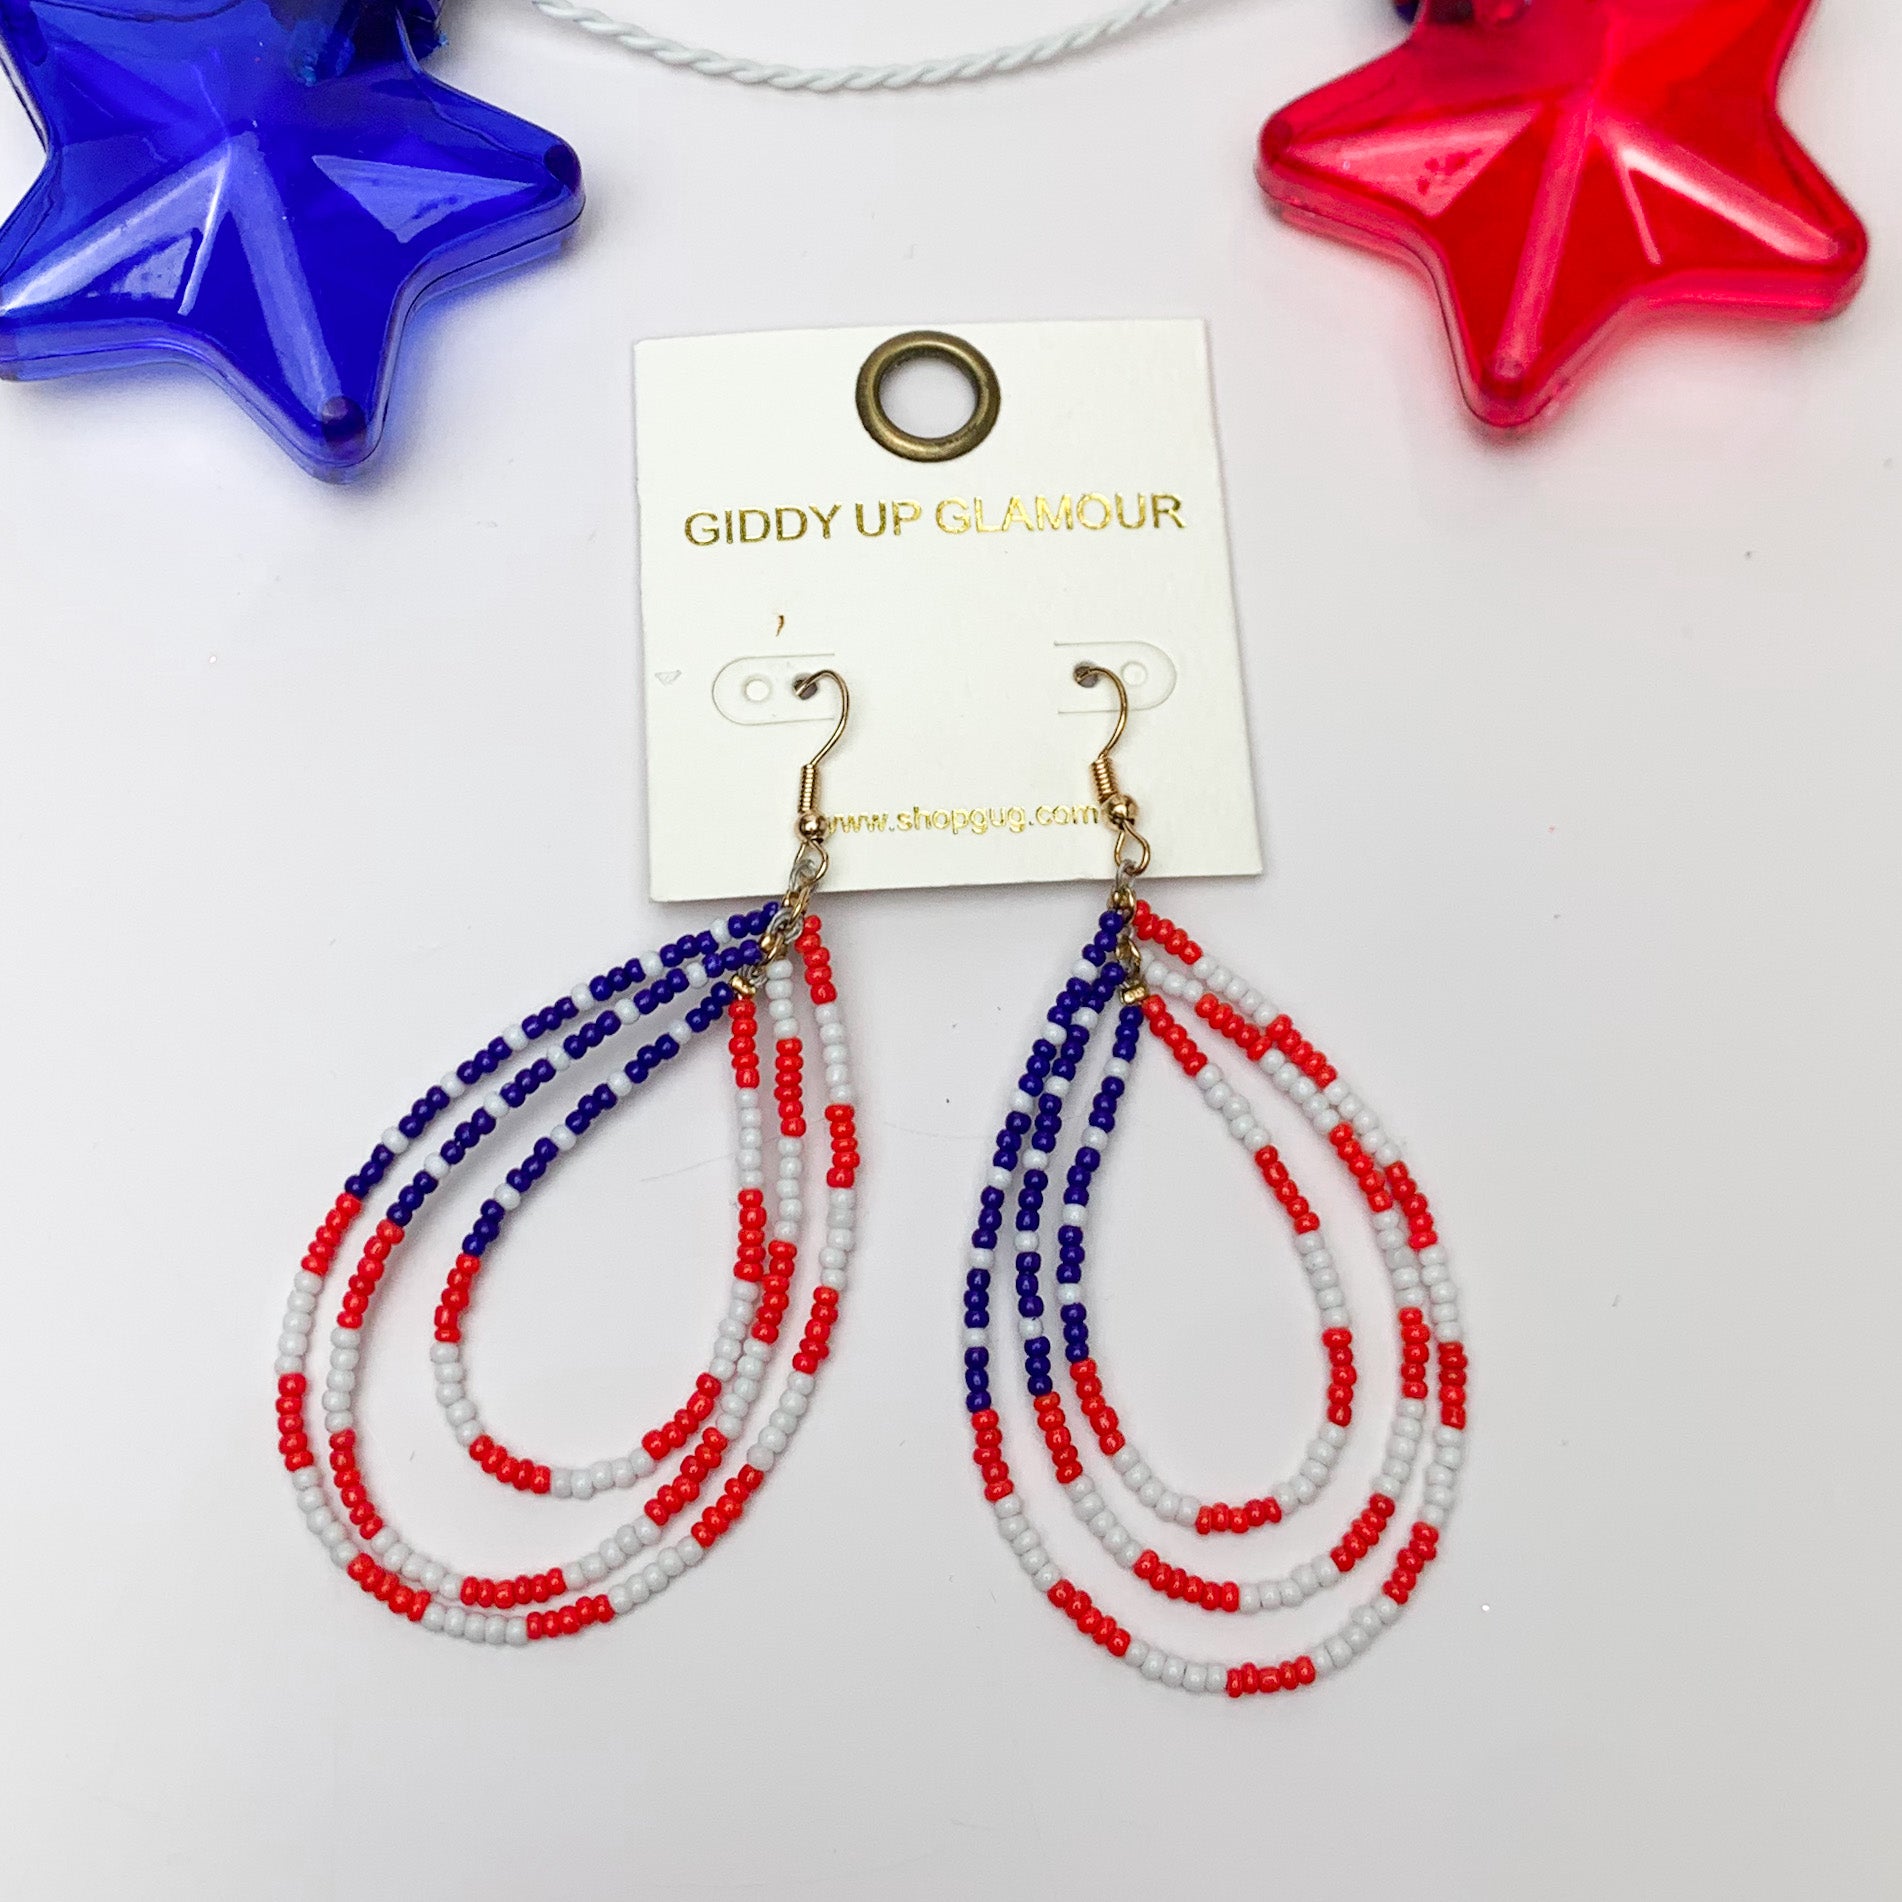 Red, White, and Beads USA Open Teardrop Earrings. Pictured on a white background with a red and blue star above the earrings for decoration.